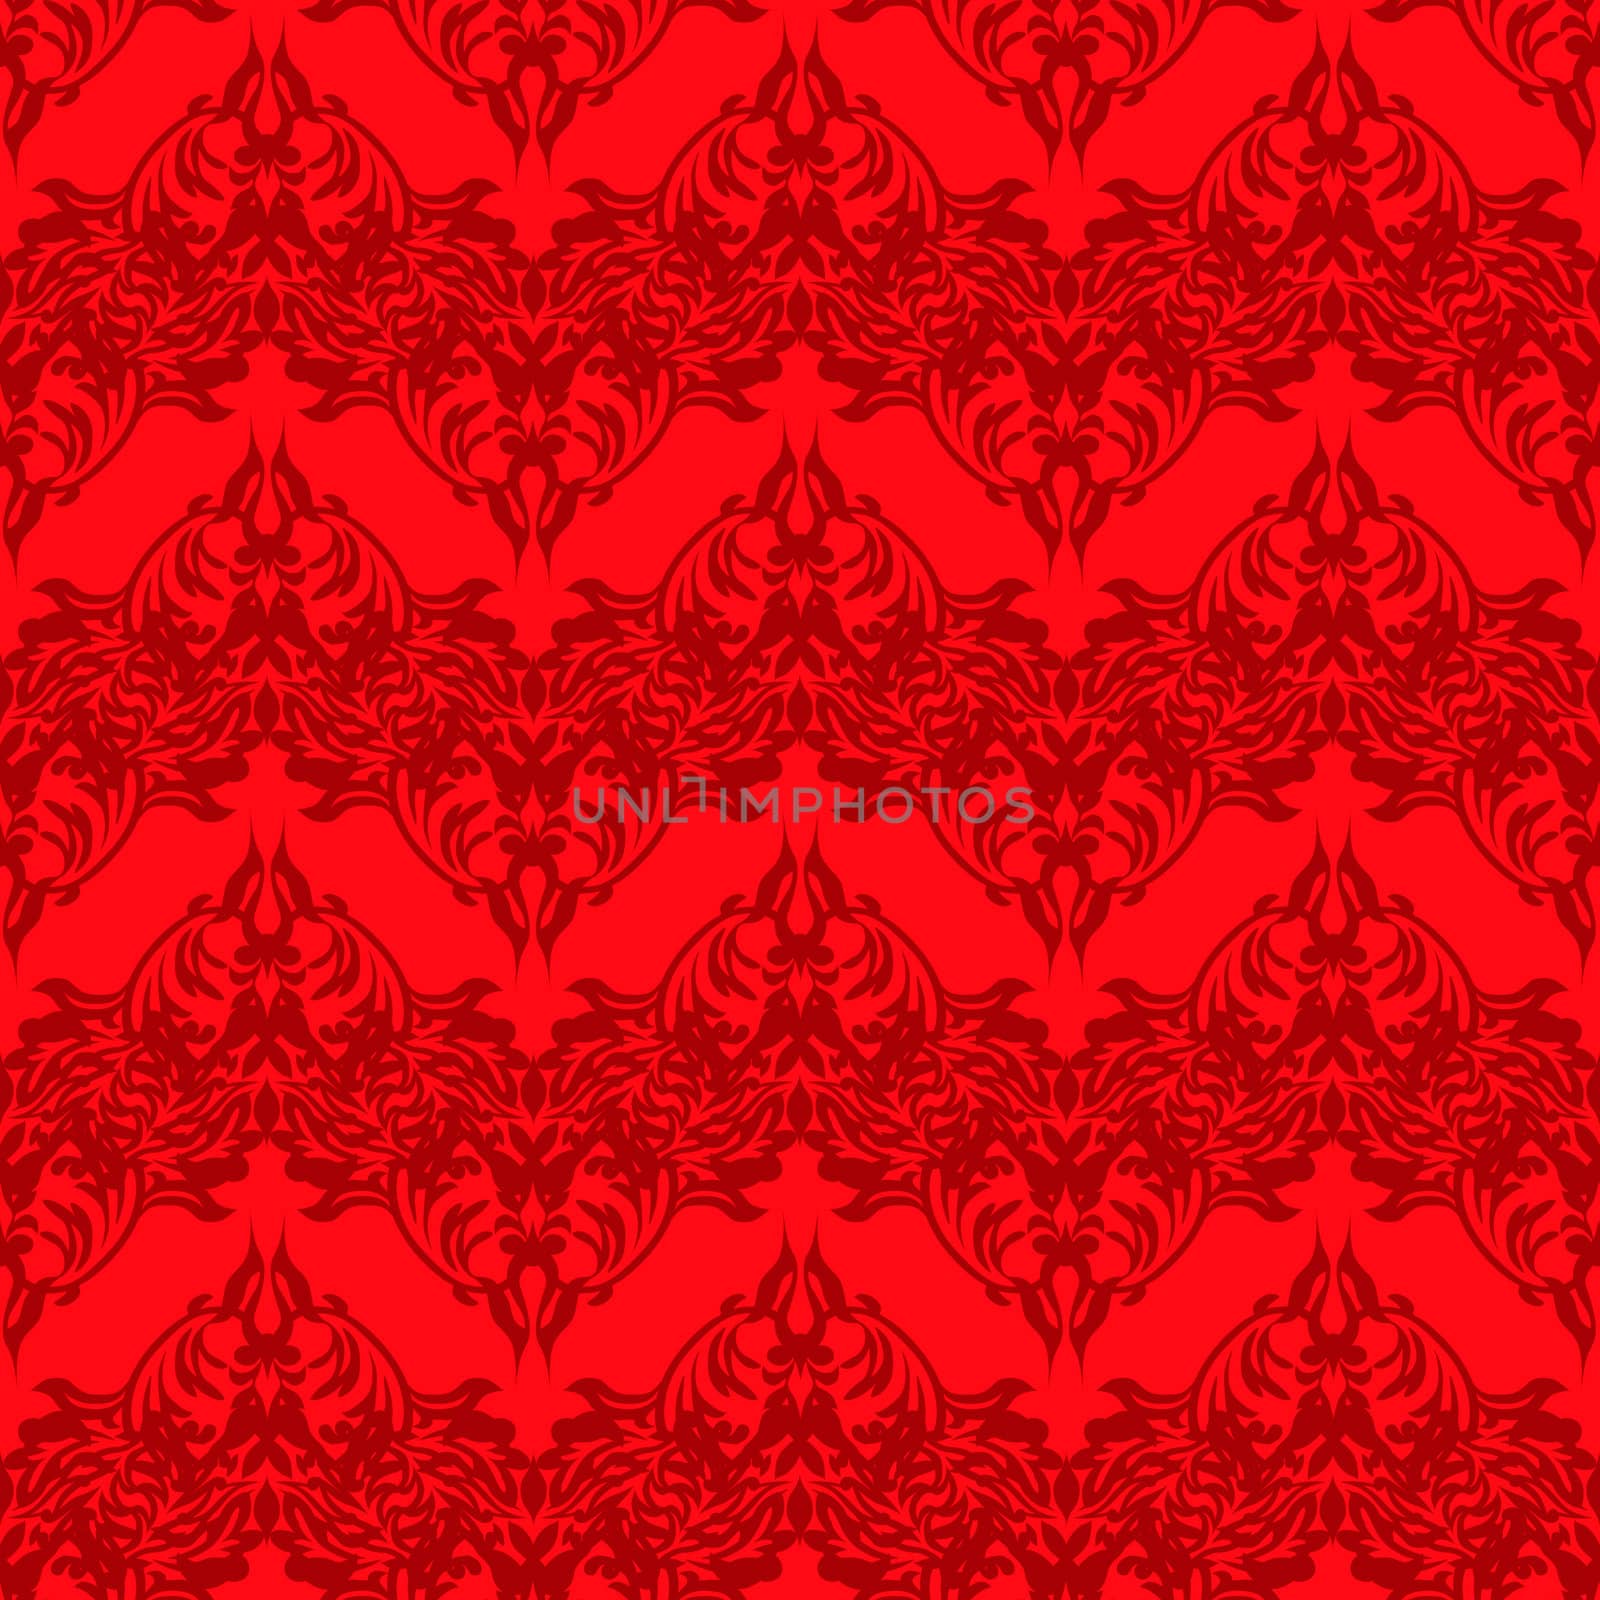 blood red abstract background pattern that seamlessly repeats